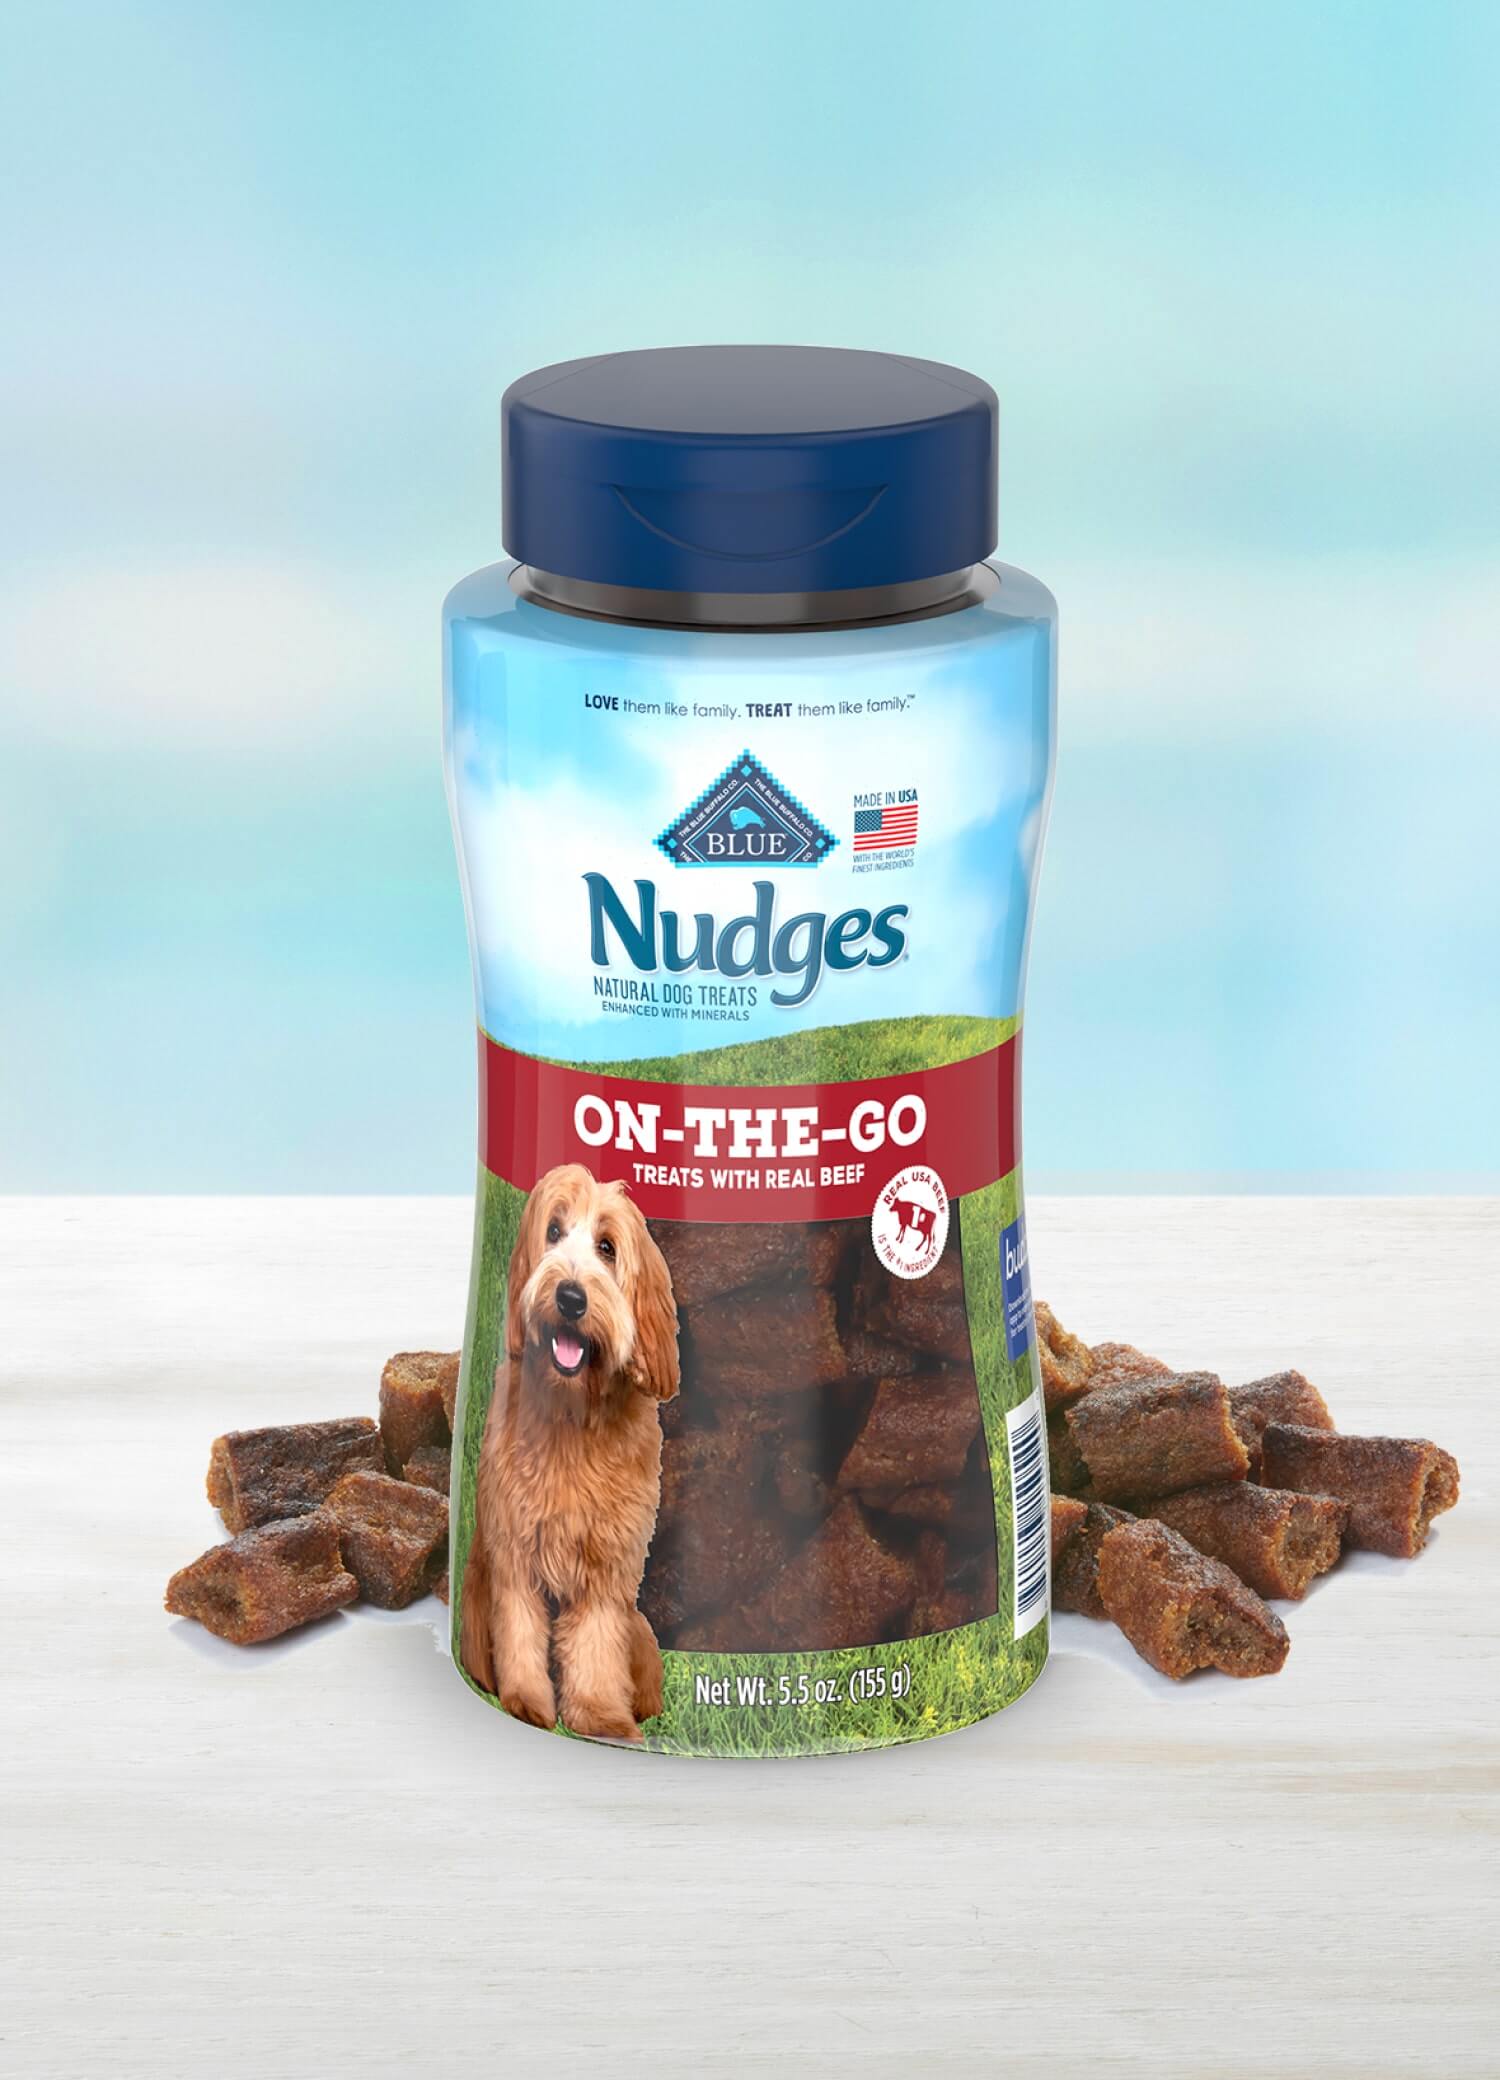 on-the-go treats with real beef with real beef dog treats